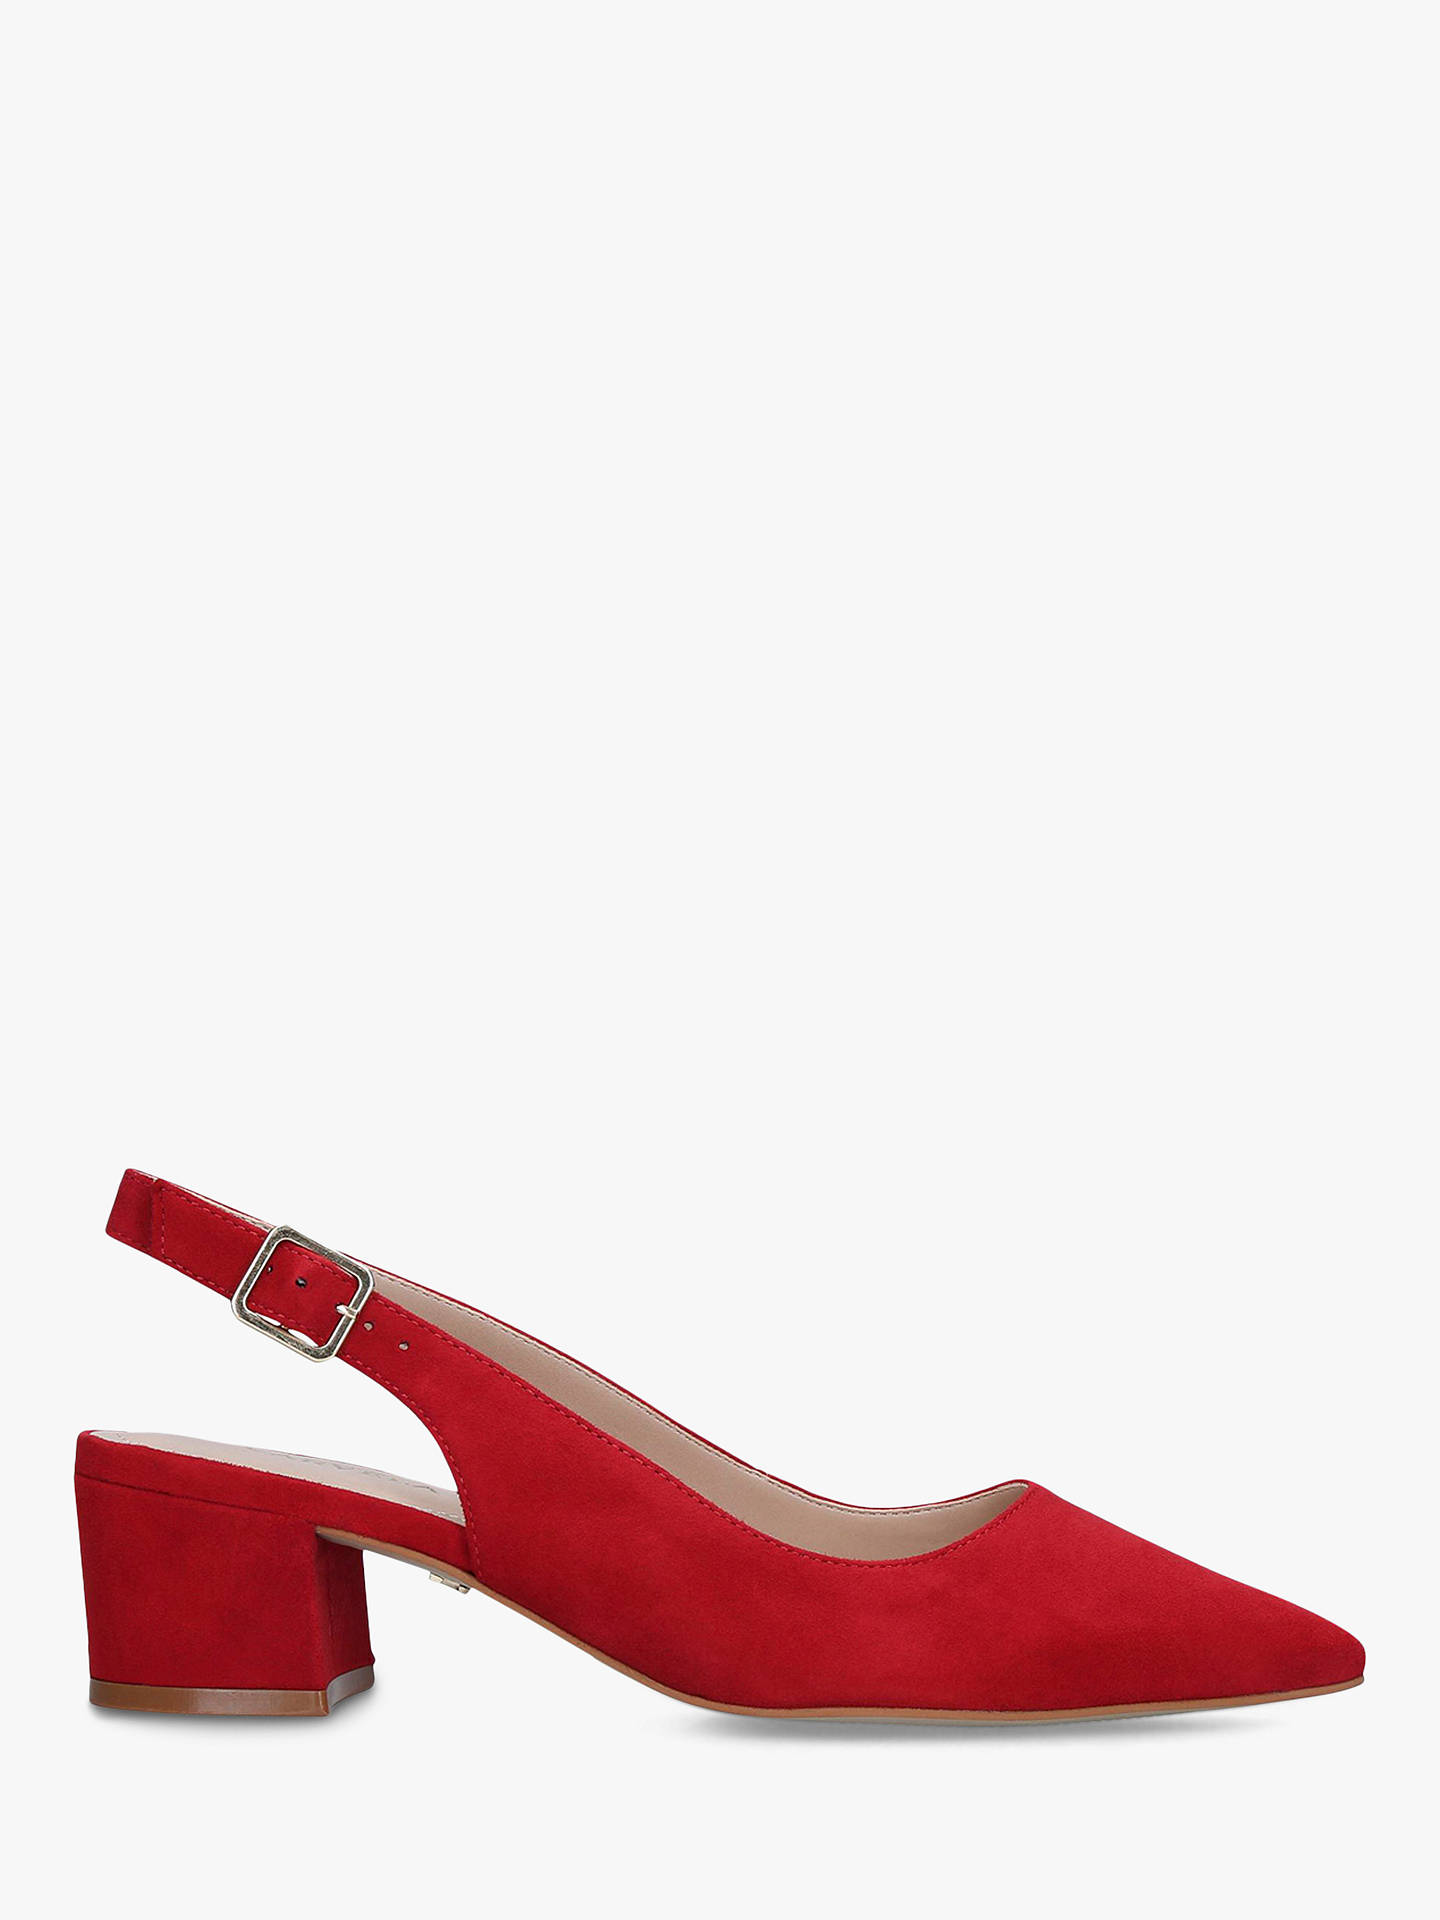 Carvela Aspire Suede Slingback Court Shoes, Bright Red at John Lewis ...